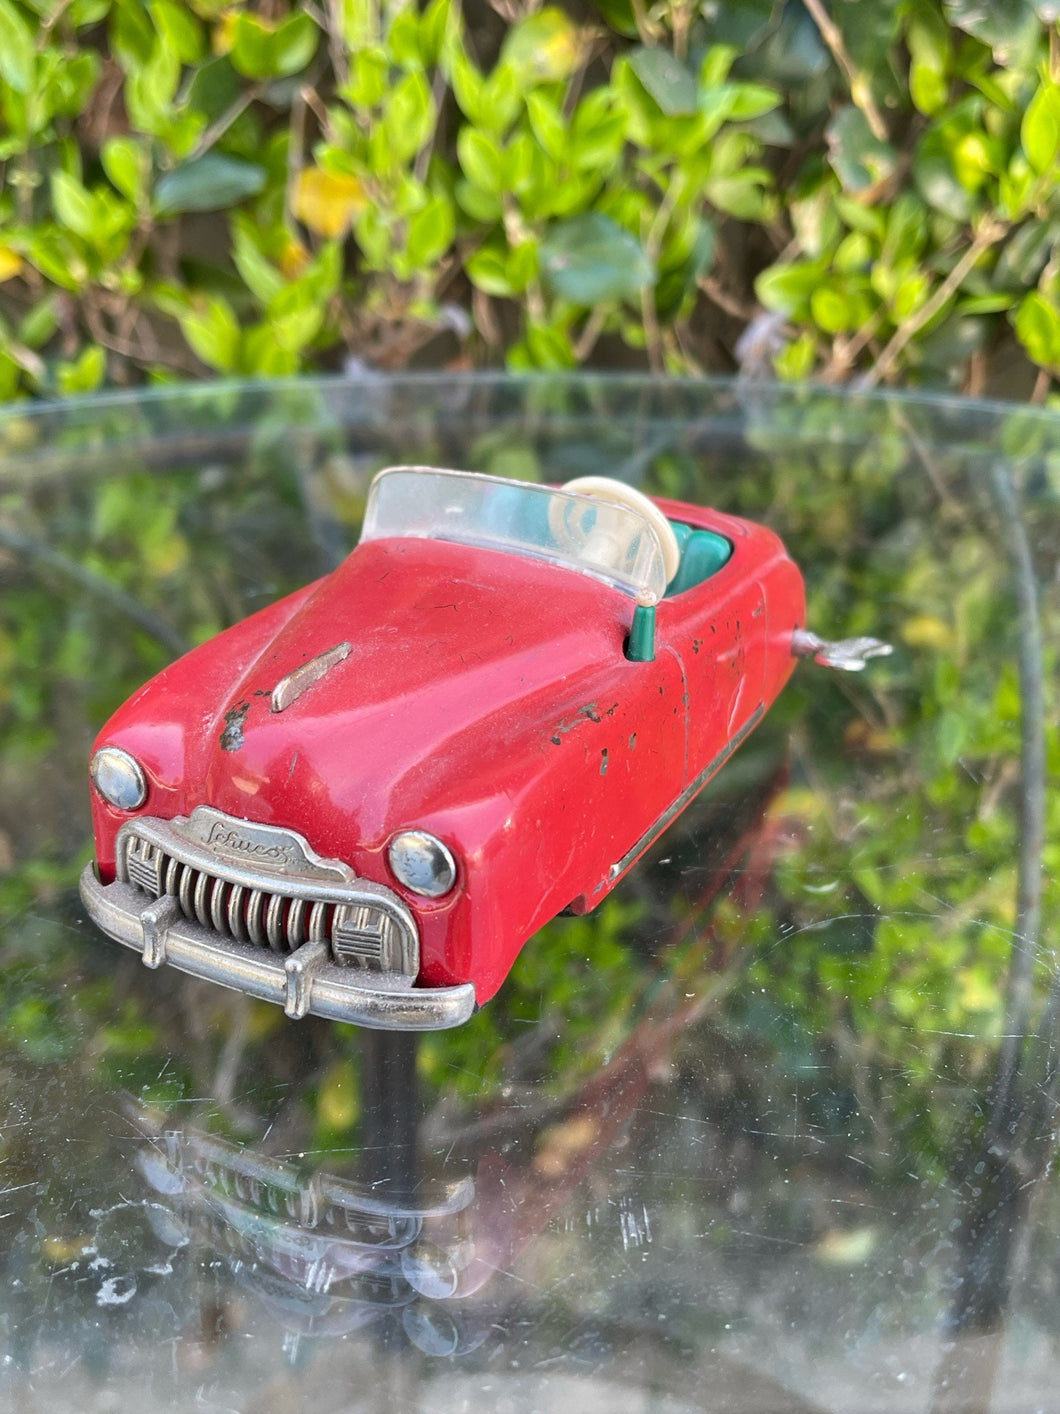 Vintage 1950’s Red Schuco Radio 4012 Convertible Car Tin Toy Windup Western Germany B72